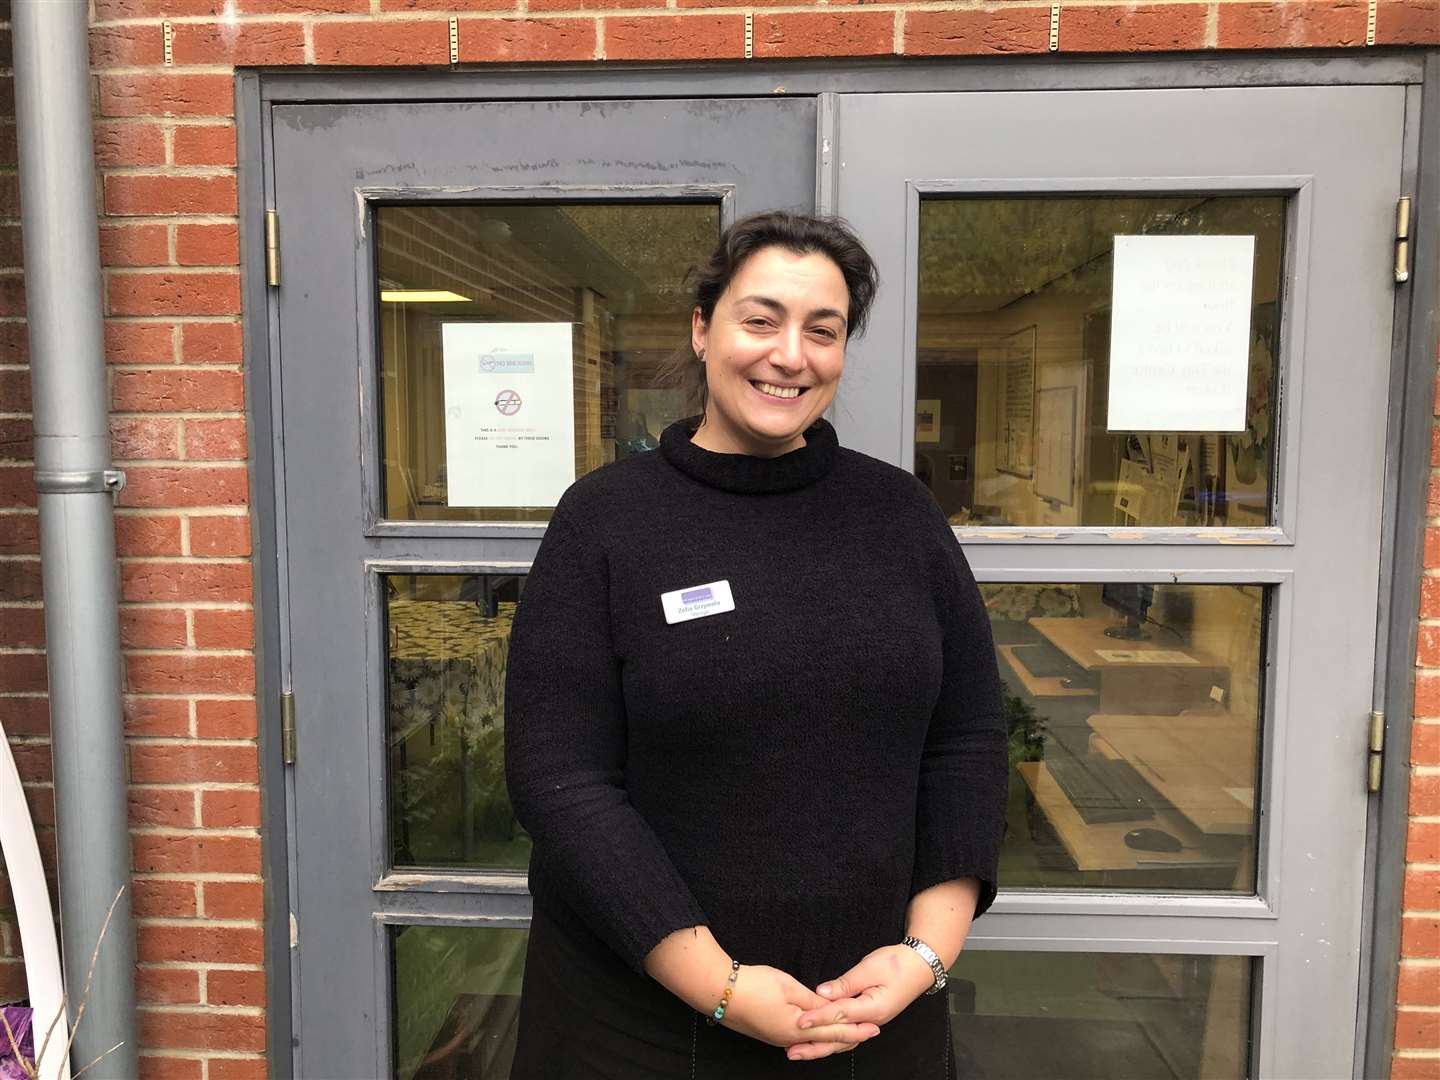 Zofia Grzymala is the homeless care manager at Maidstone Day Centre (22297962)